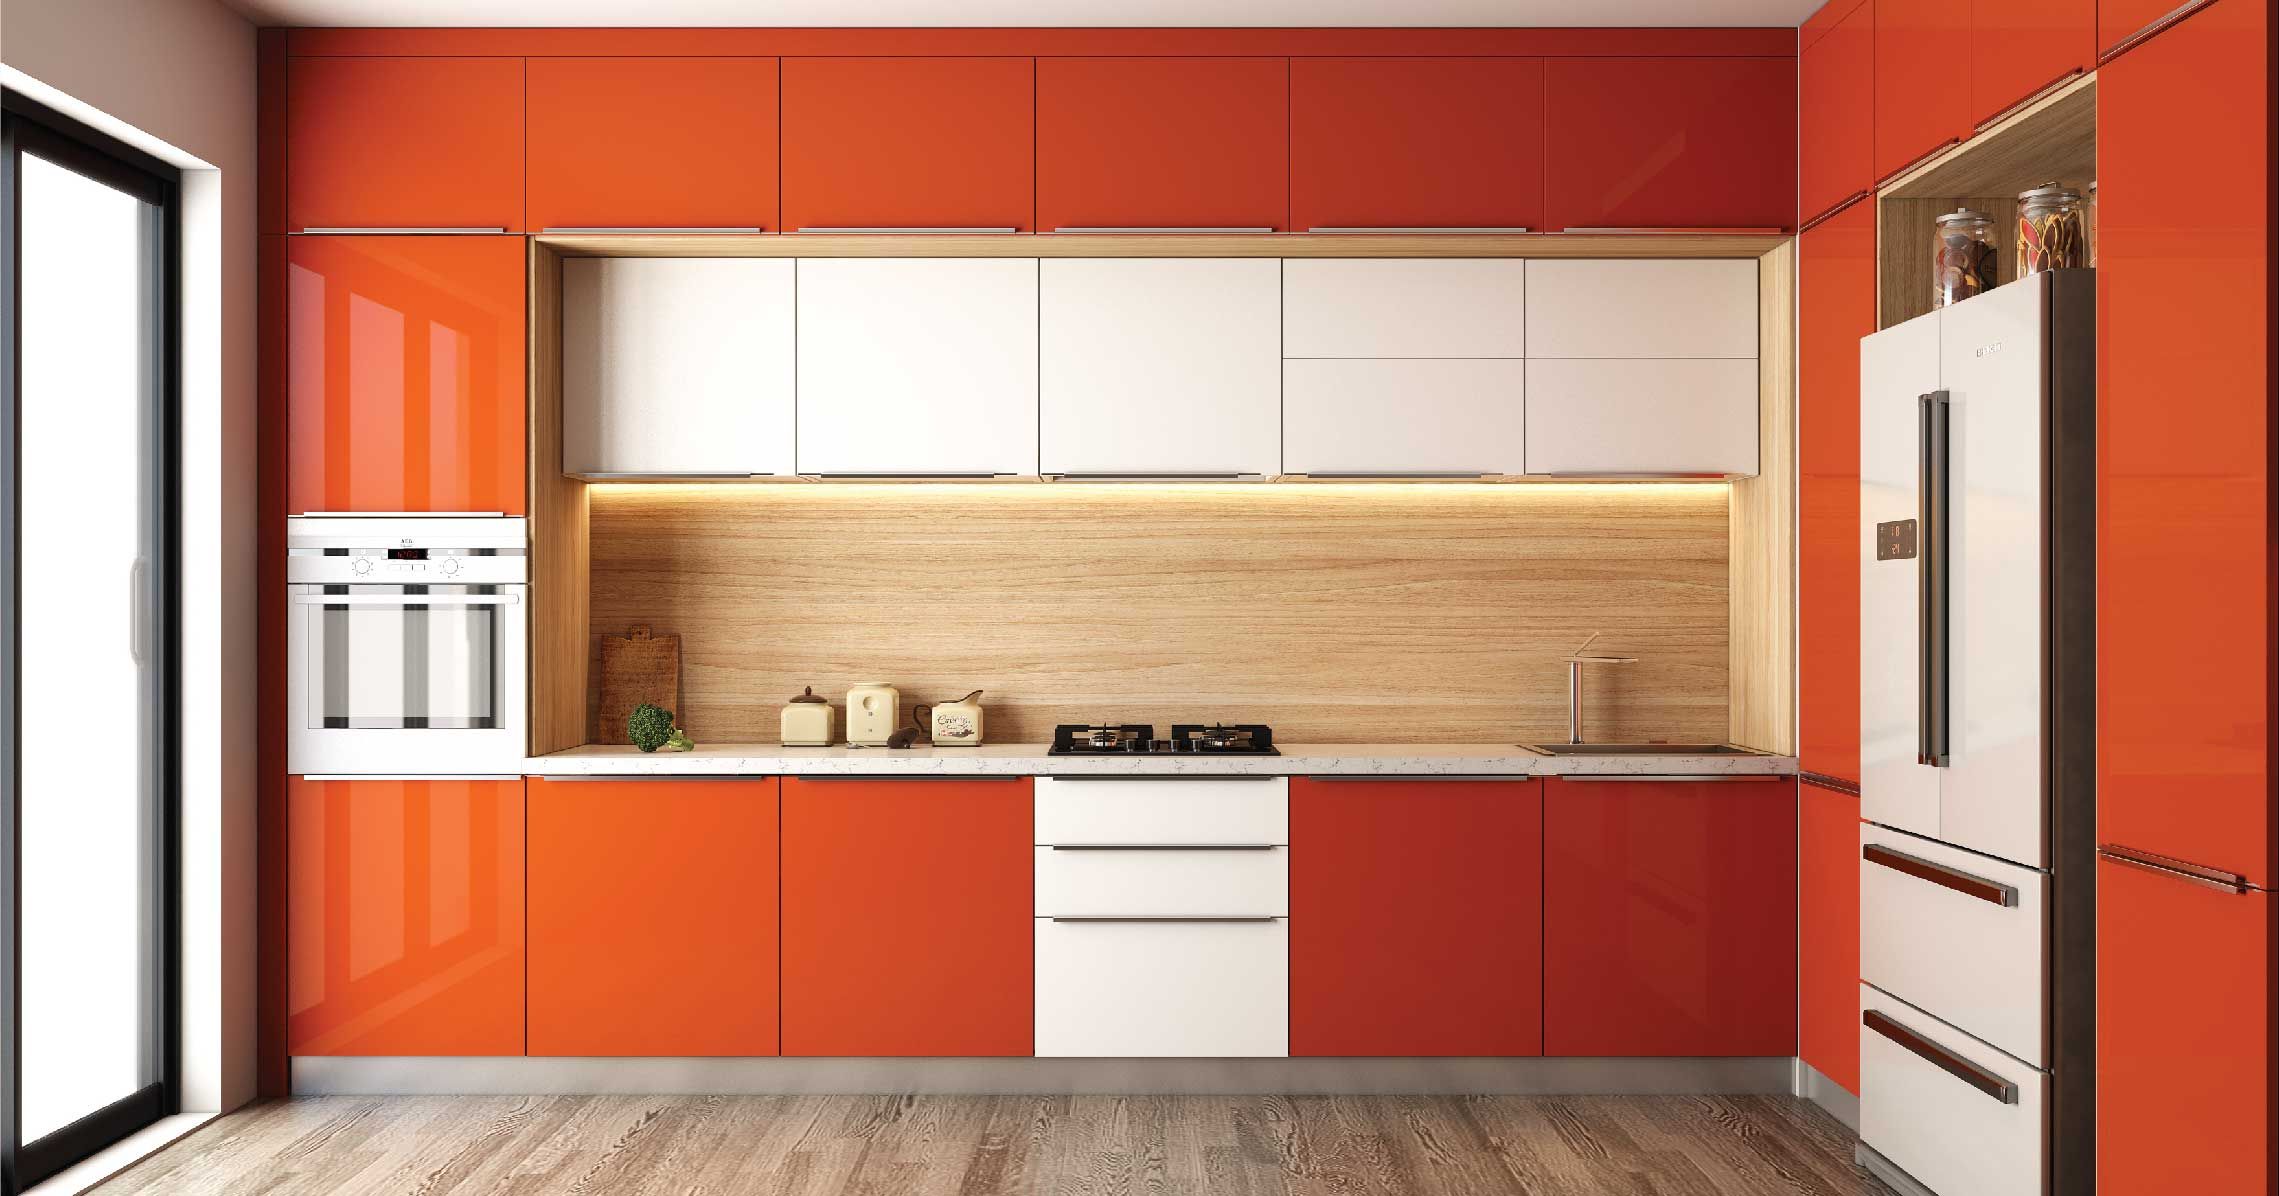 All About Acrylic Kitchen Cabinets